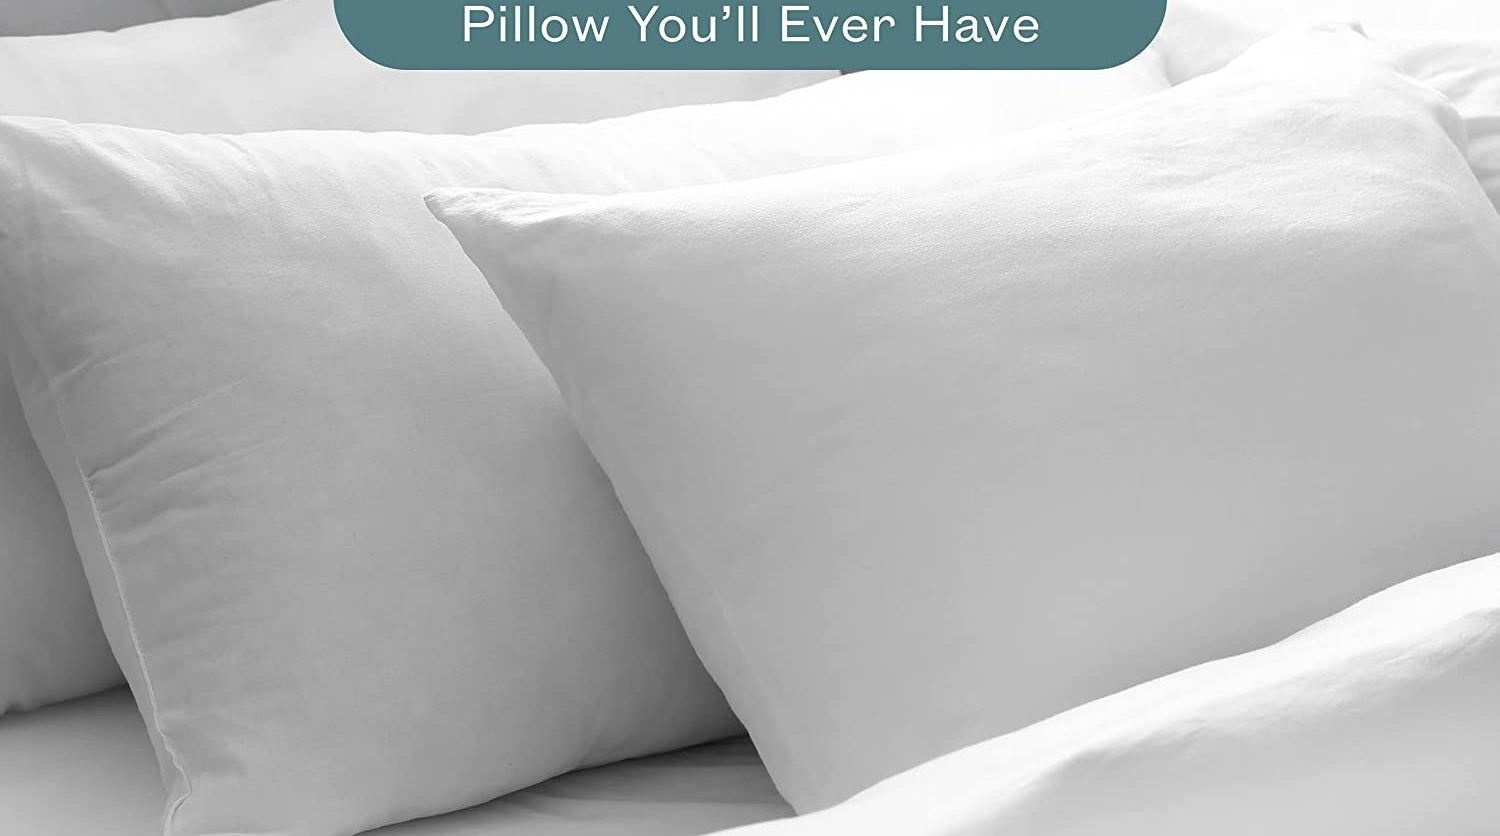 The pillows on a bed